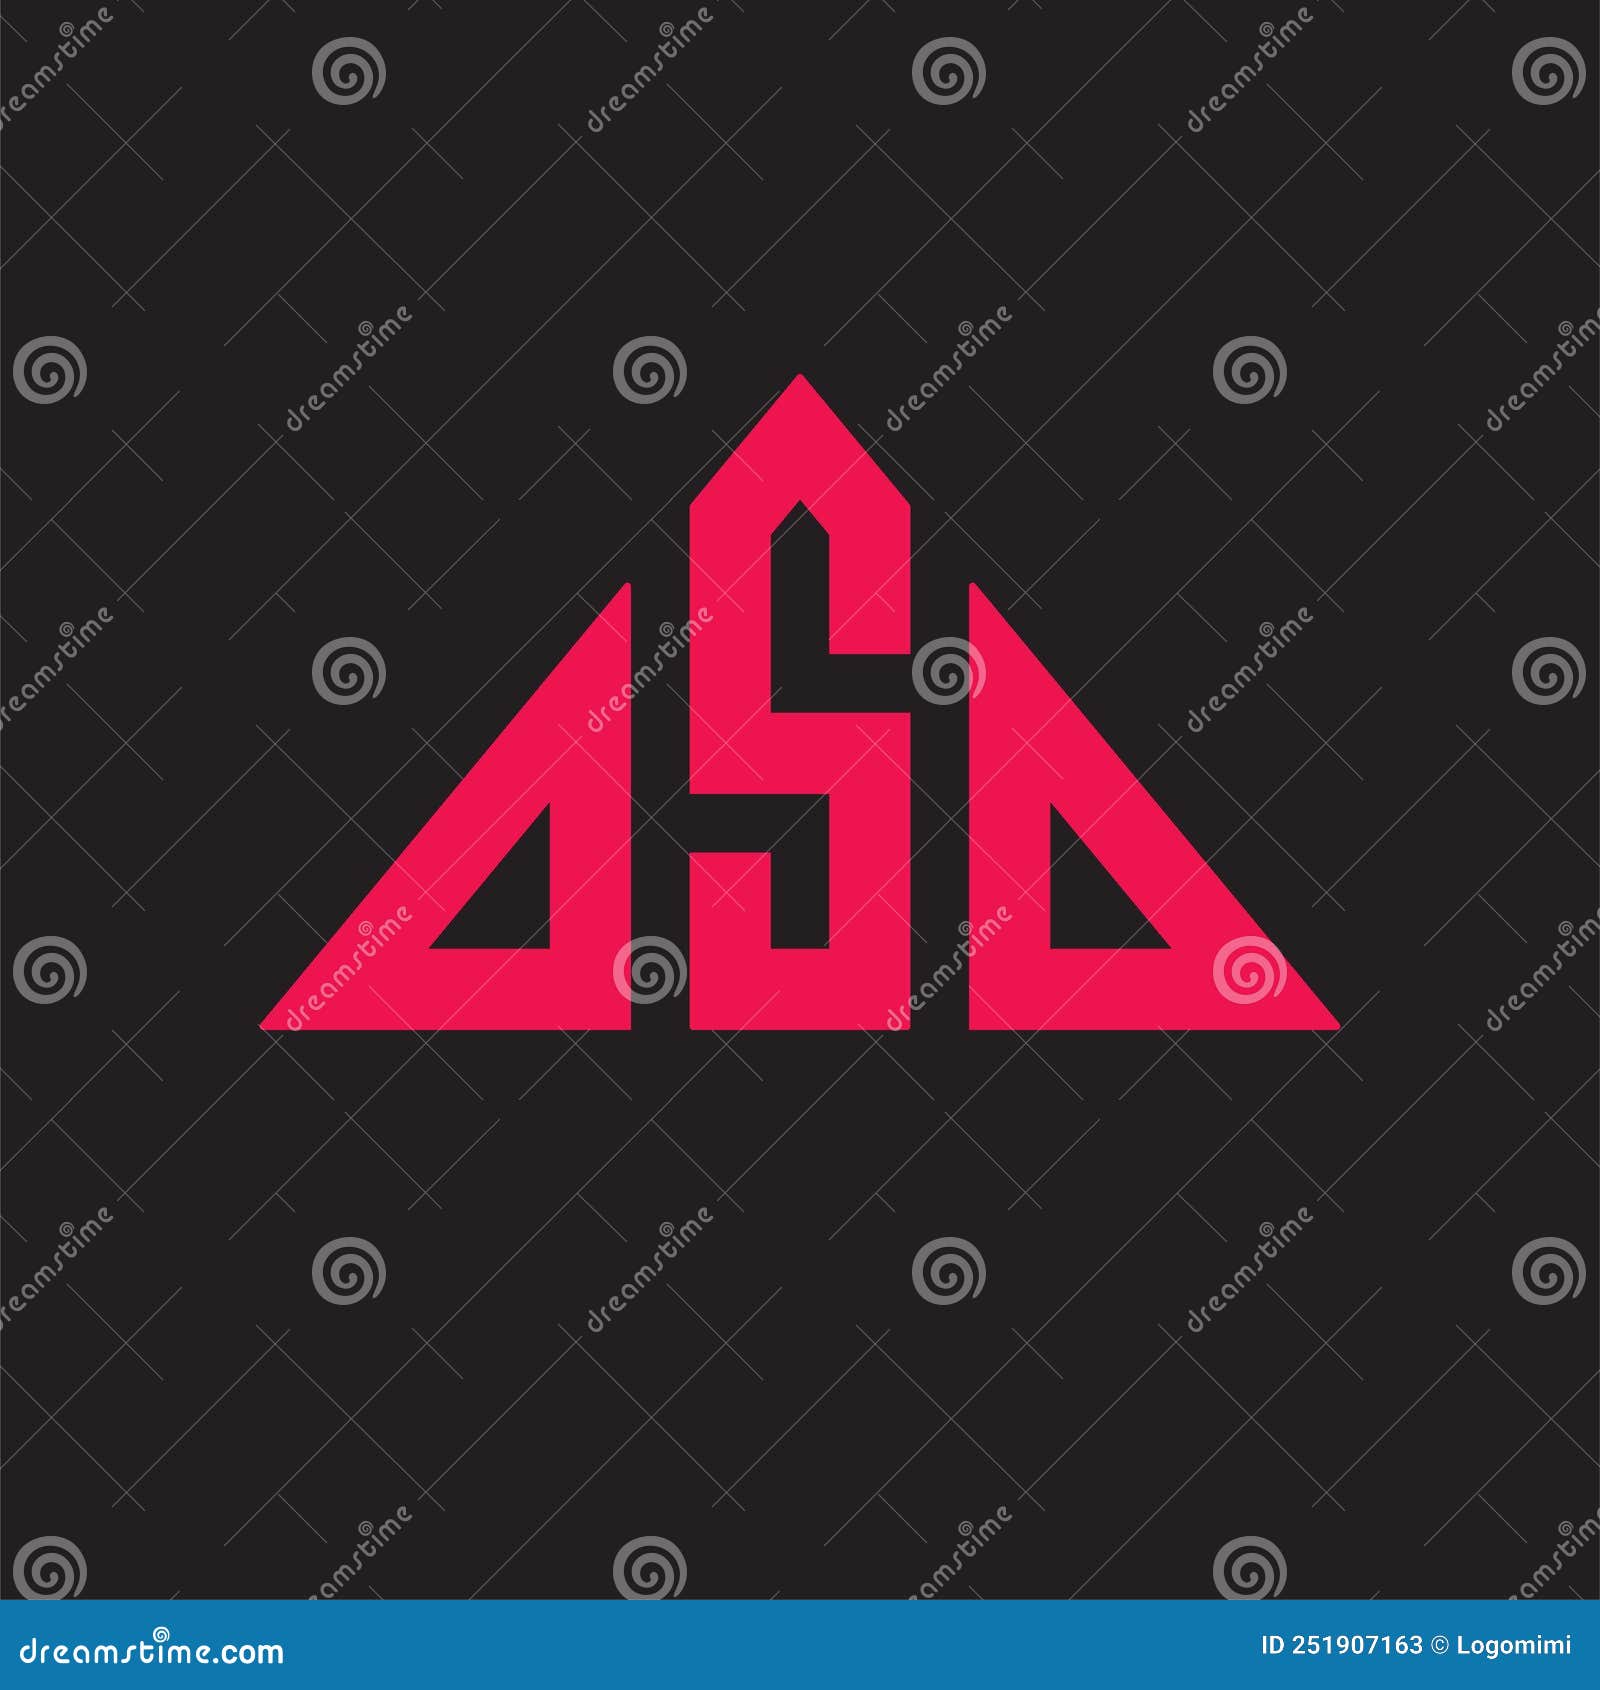 initial letter oso logo template, triange  logotype - 